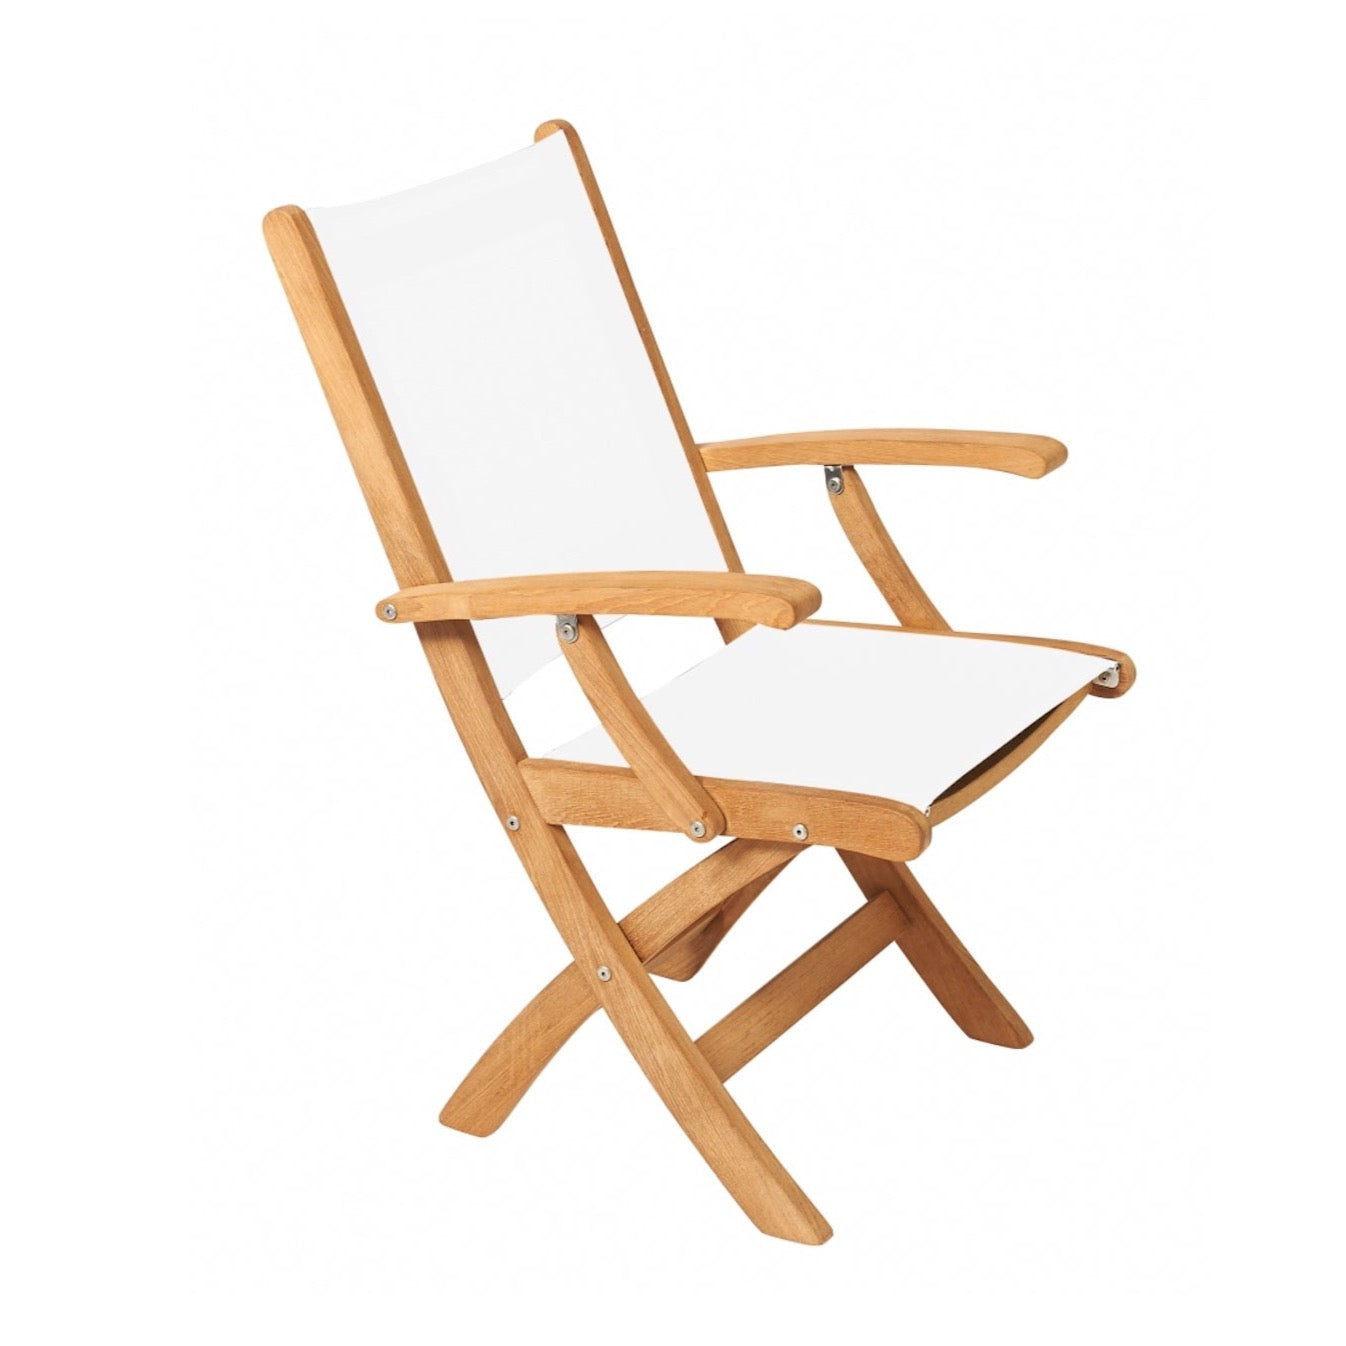 Traditional teak Kate folding chair with armrests